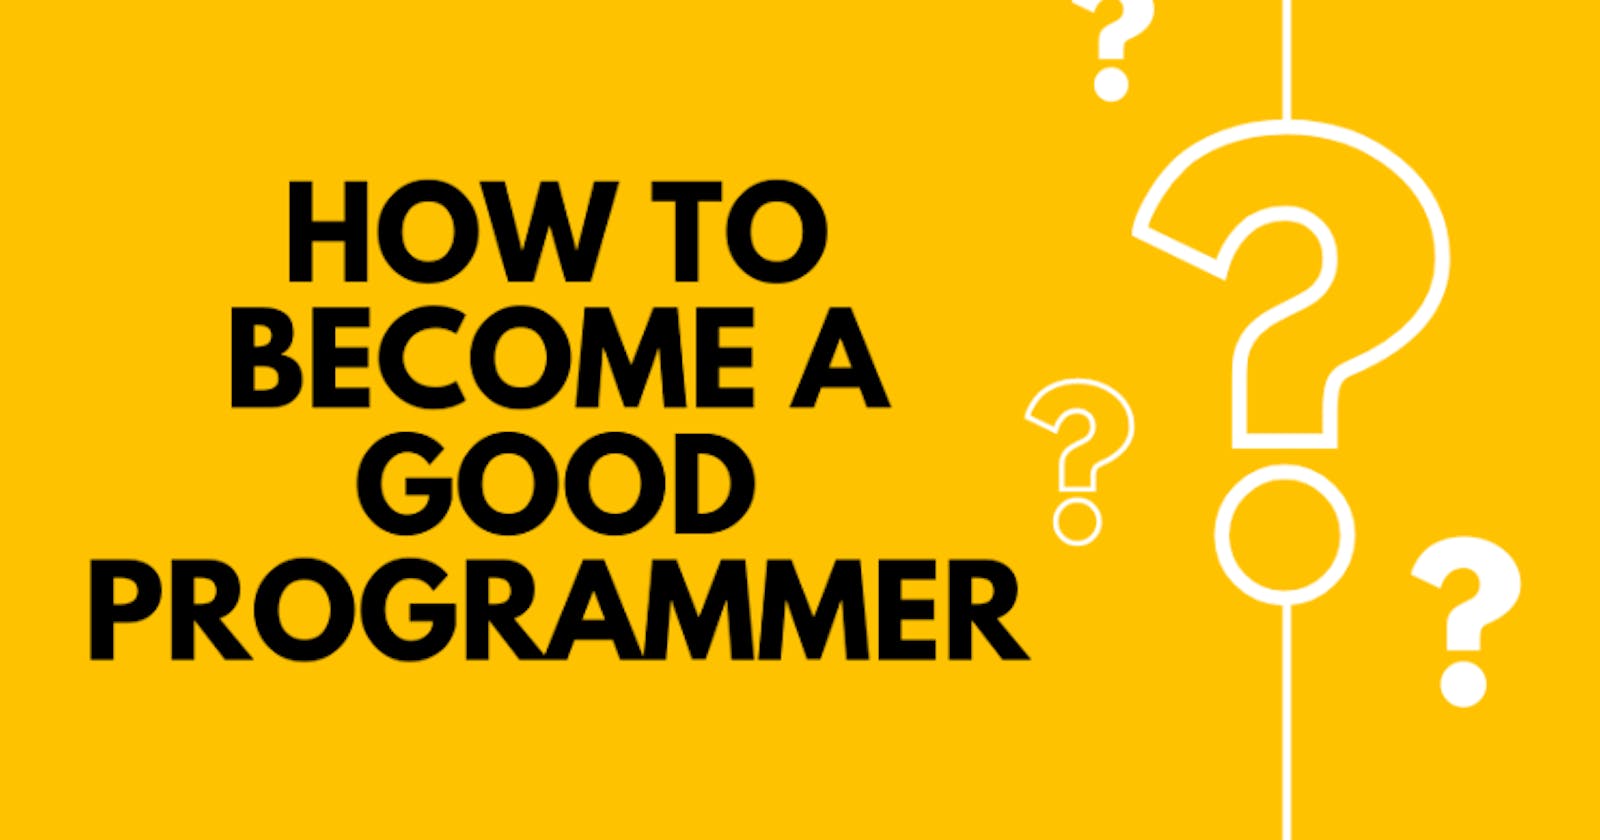 How To Become A Good Programmer